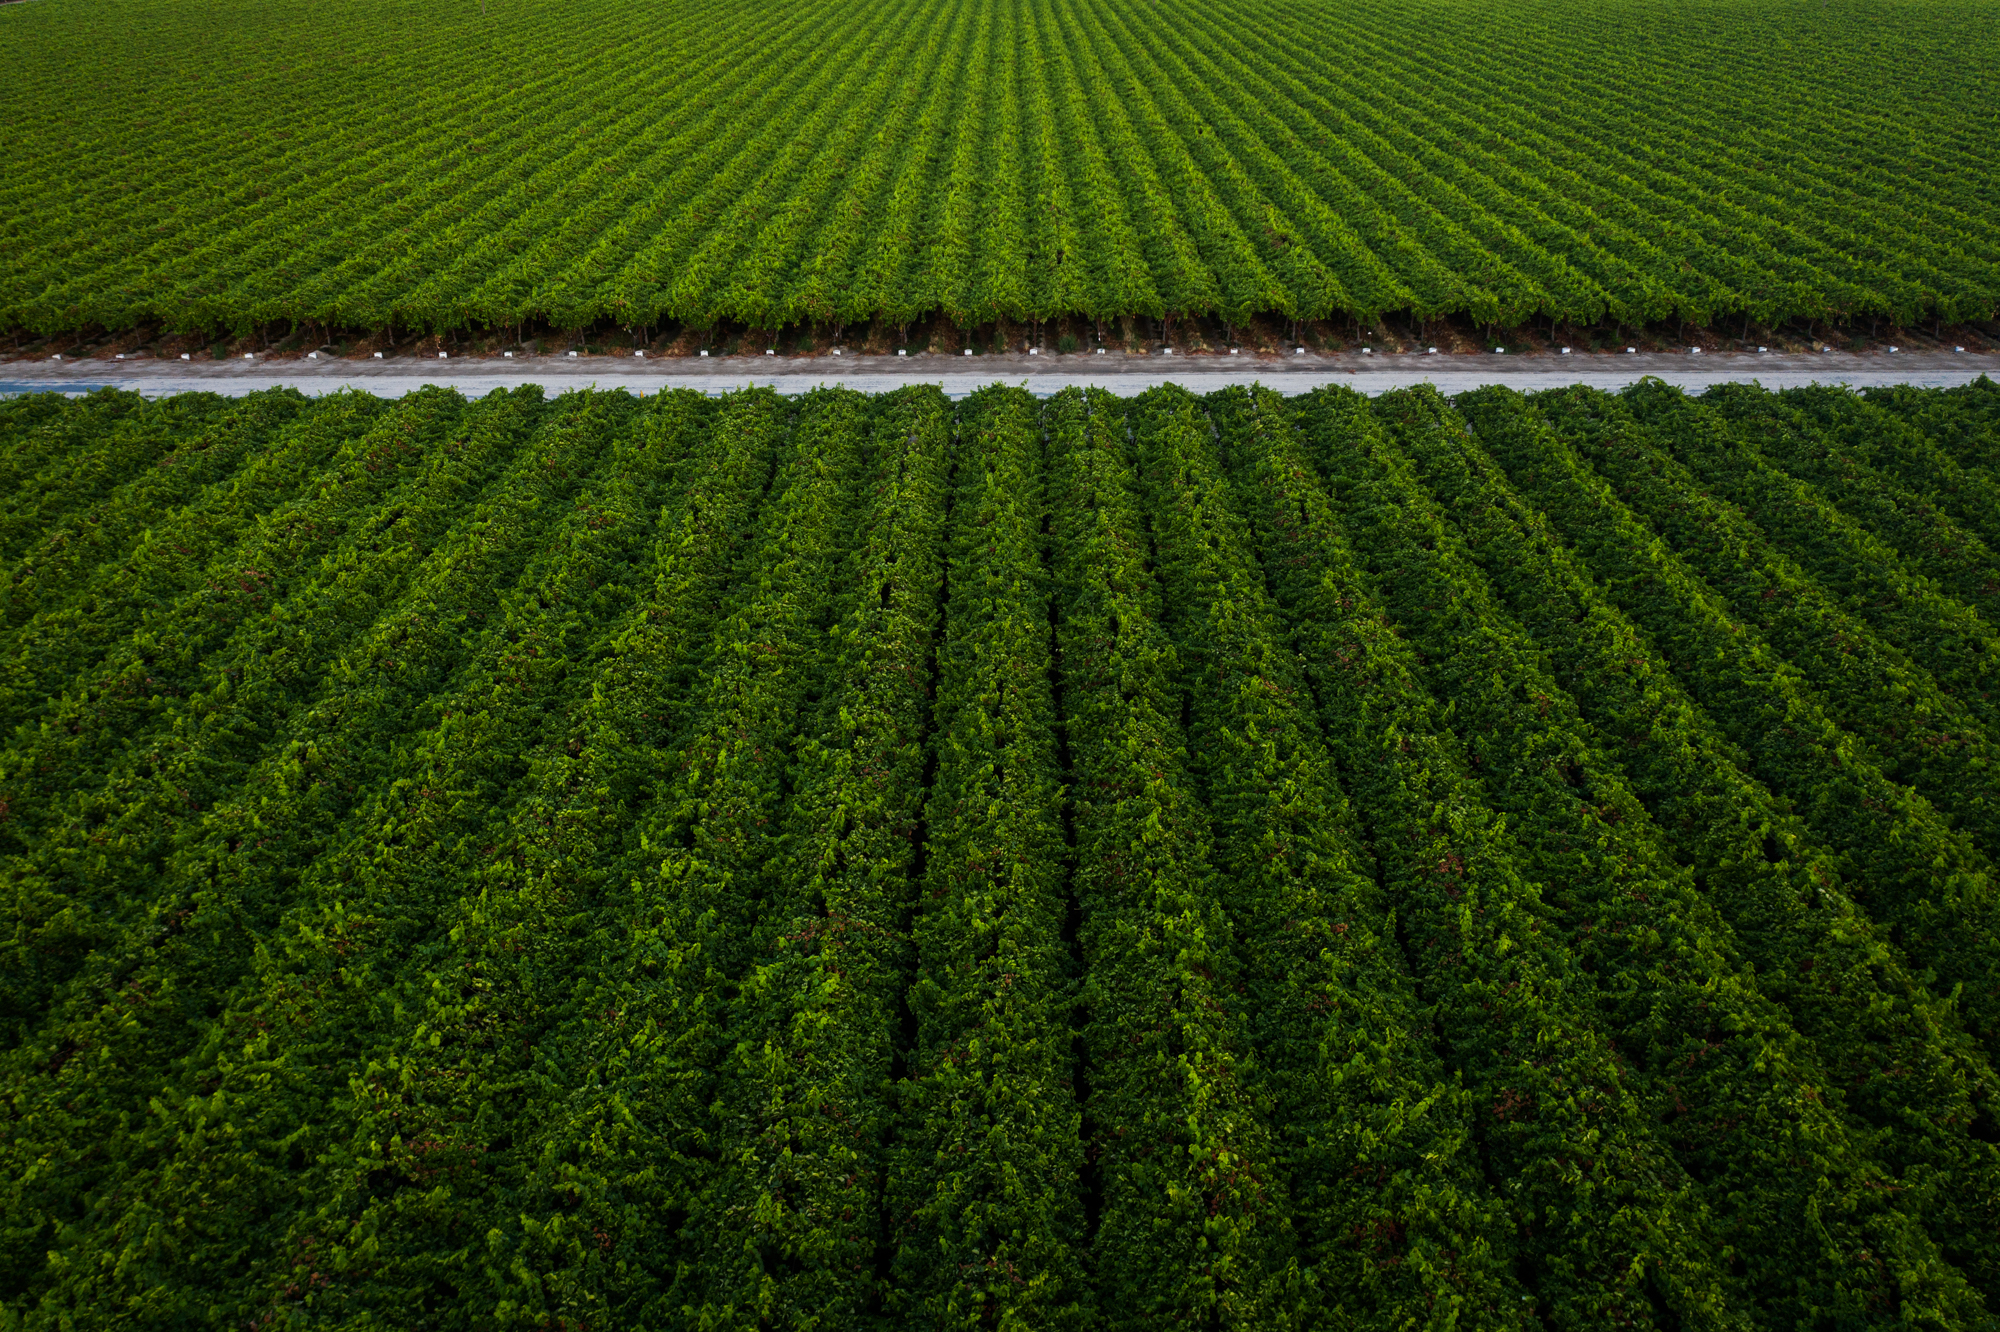 Aerial view of table grapes in Fowler, California